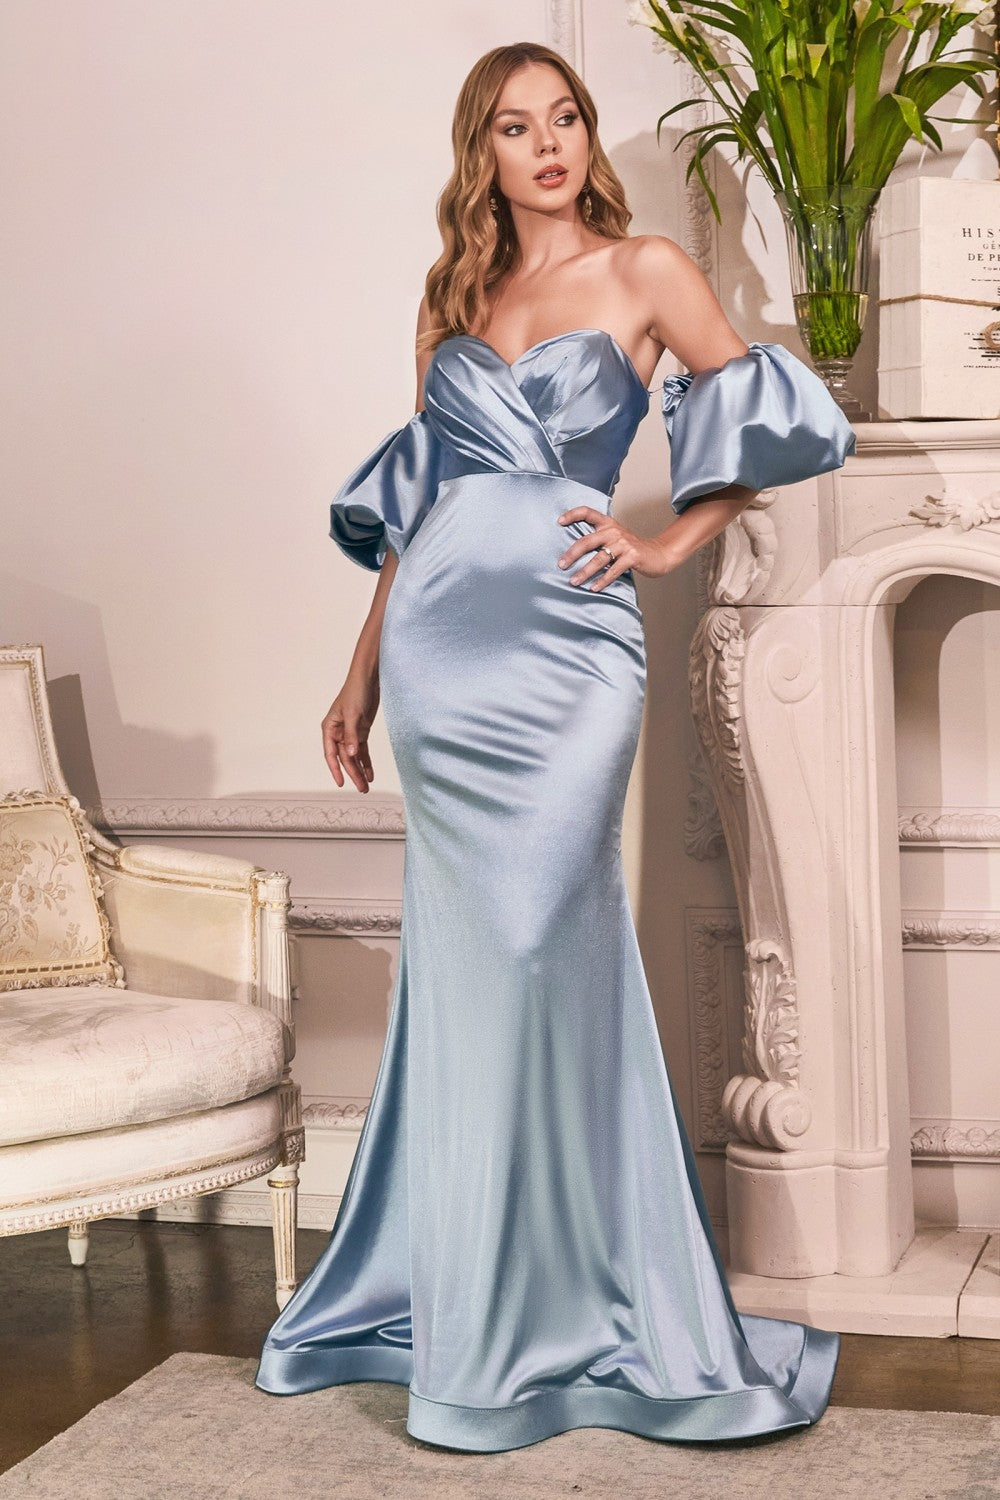 Luxury Puff Sleeves Satin Curve Gown Gathered Wrapped Sweetheart Bodice Mid Open Back Elegant Style Classic Vintage CDCD983 Elsy Style Evening Dress